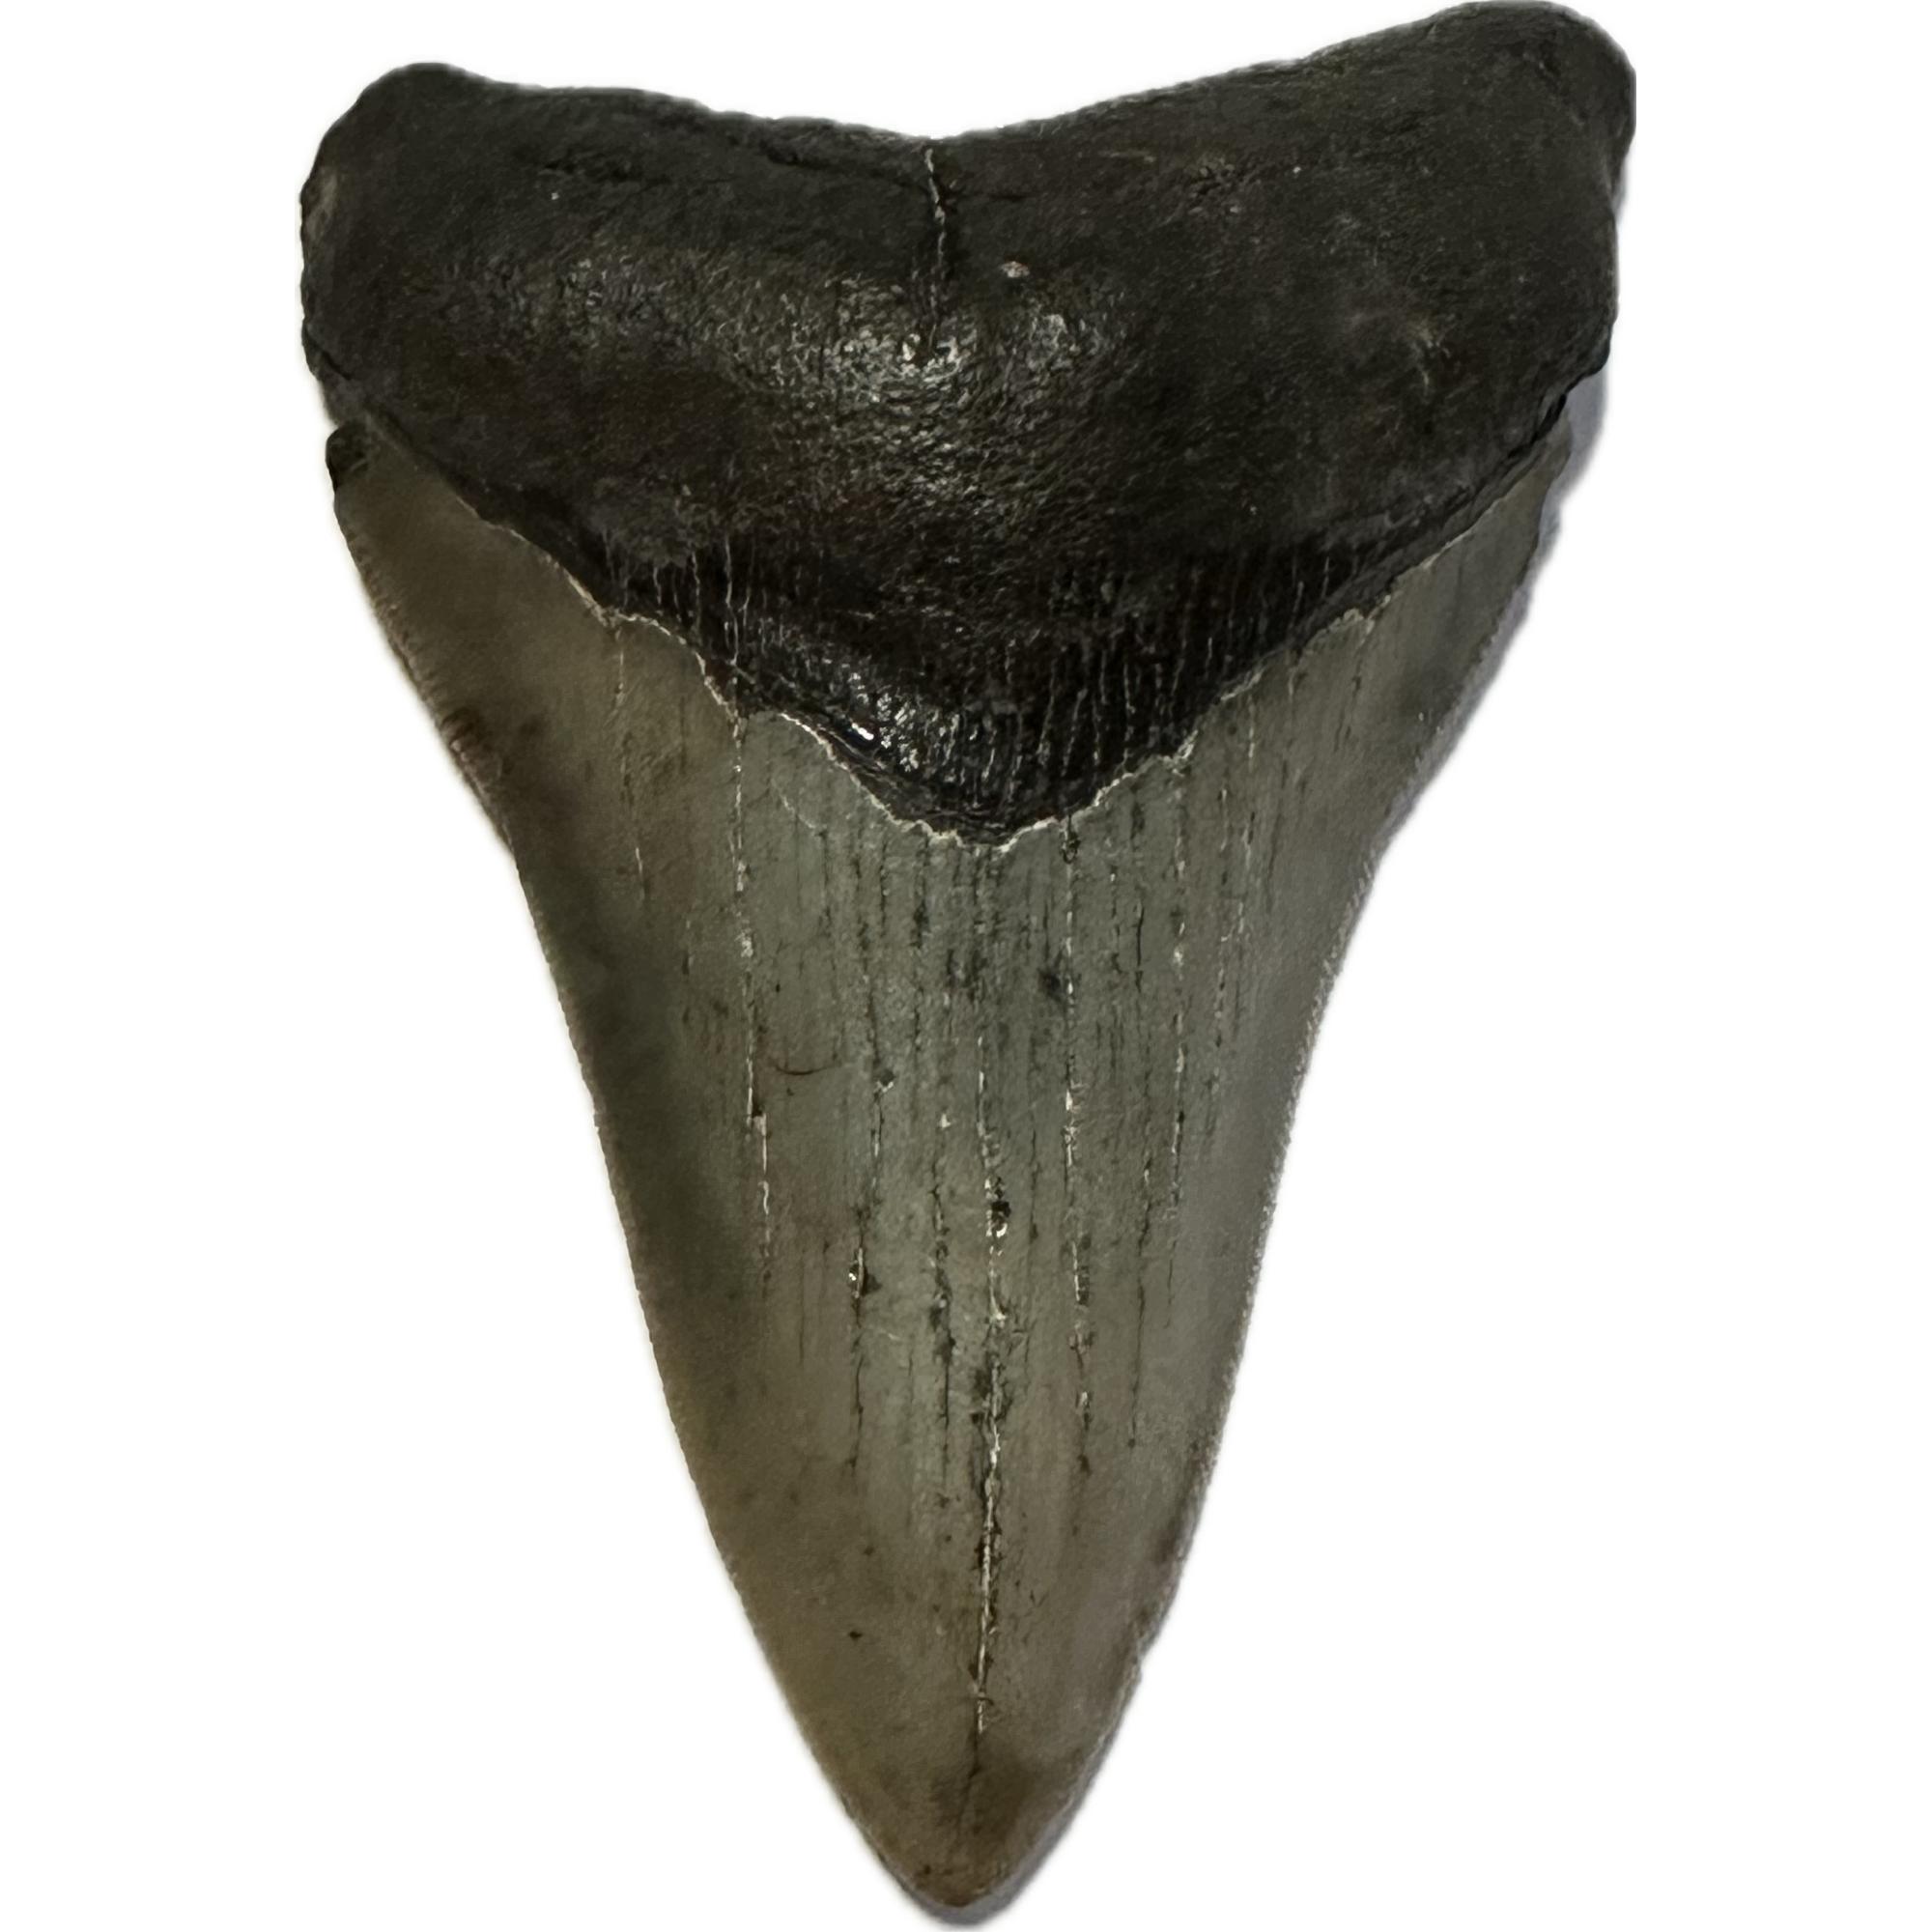 Megalodon tooth 3.40” great serrations and beautiful gray color